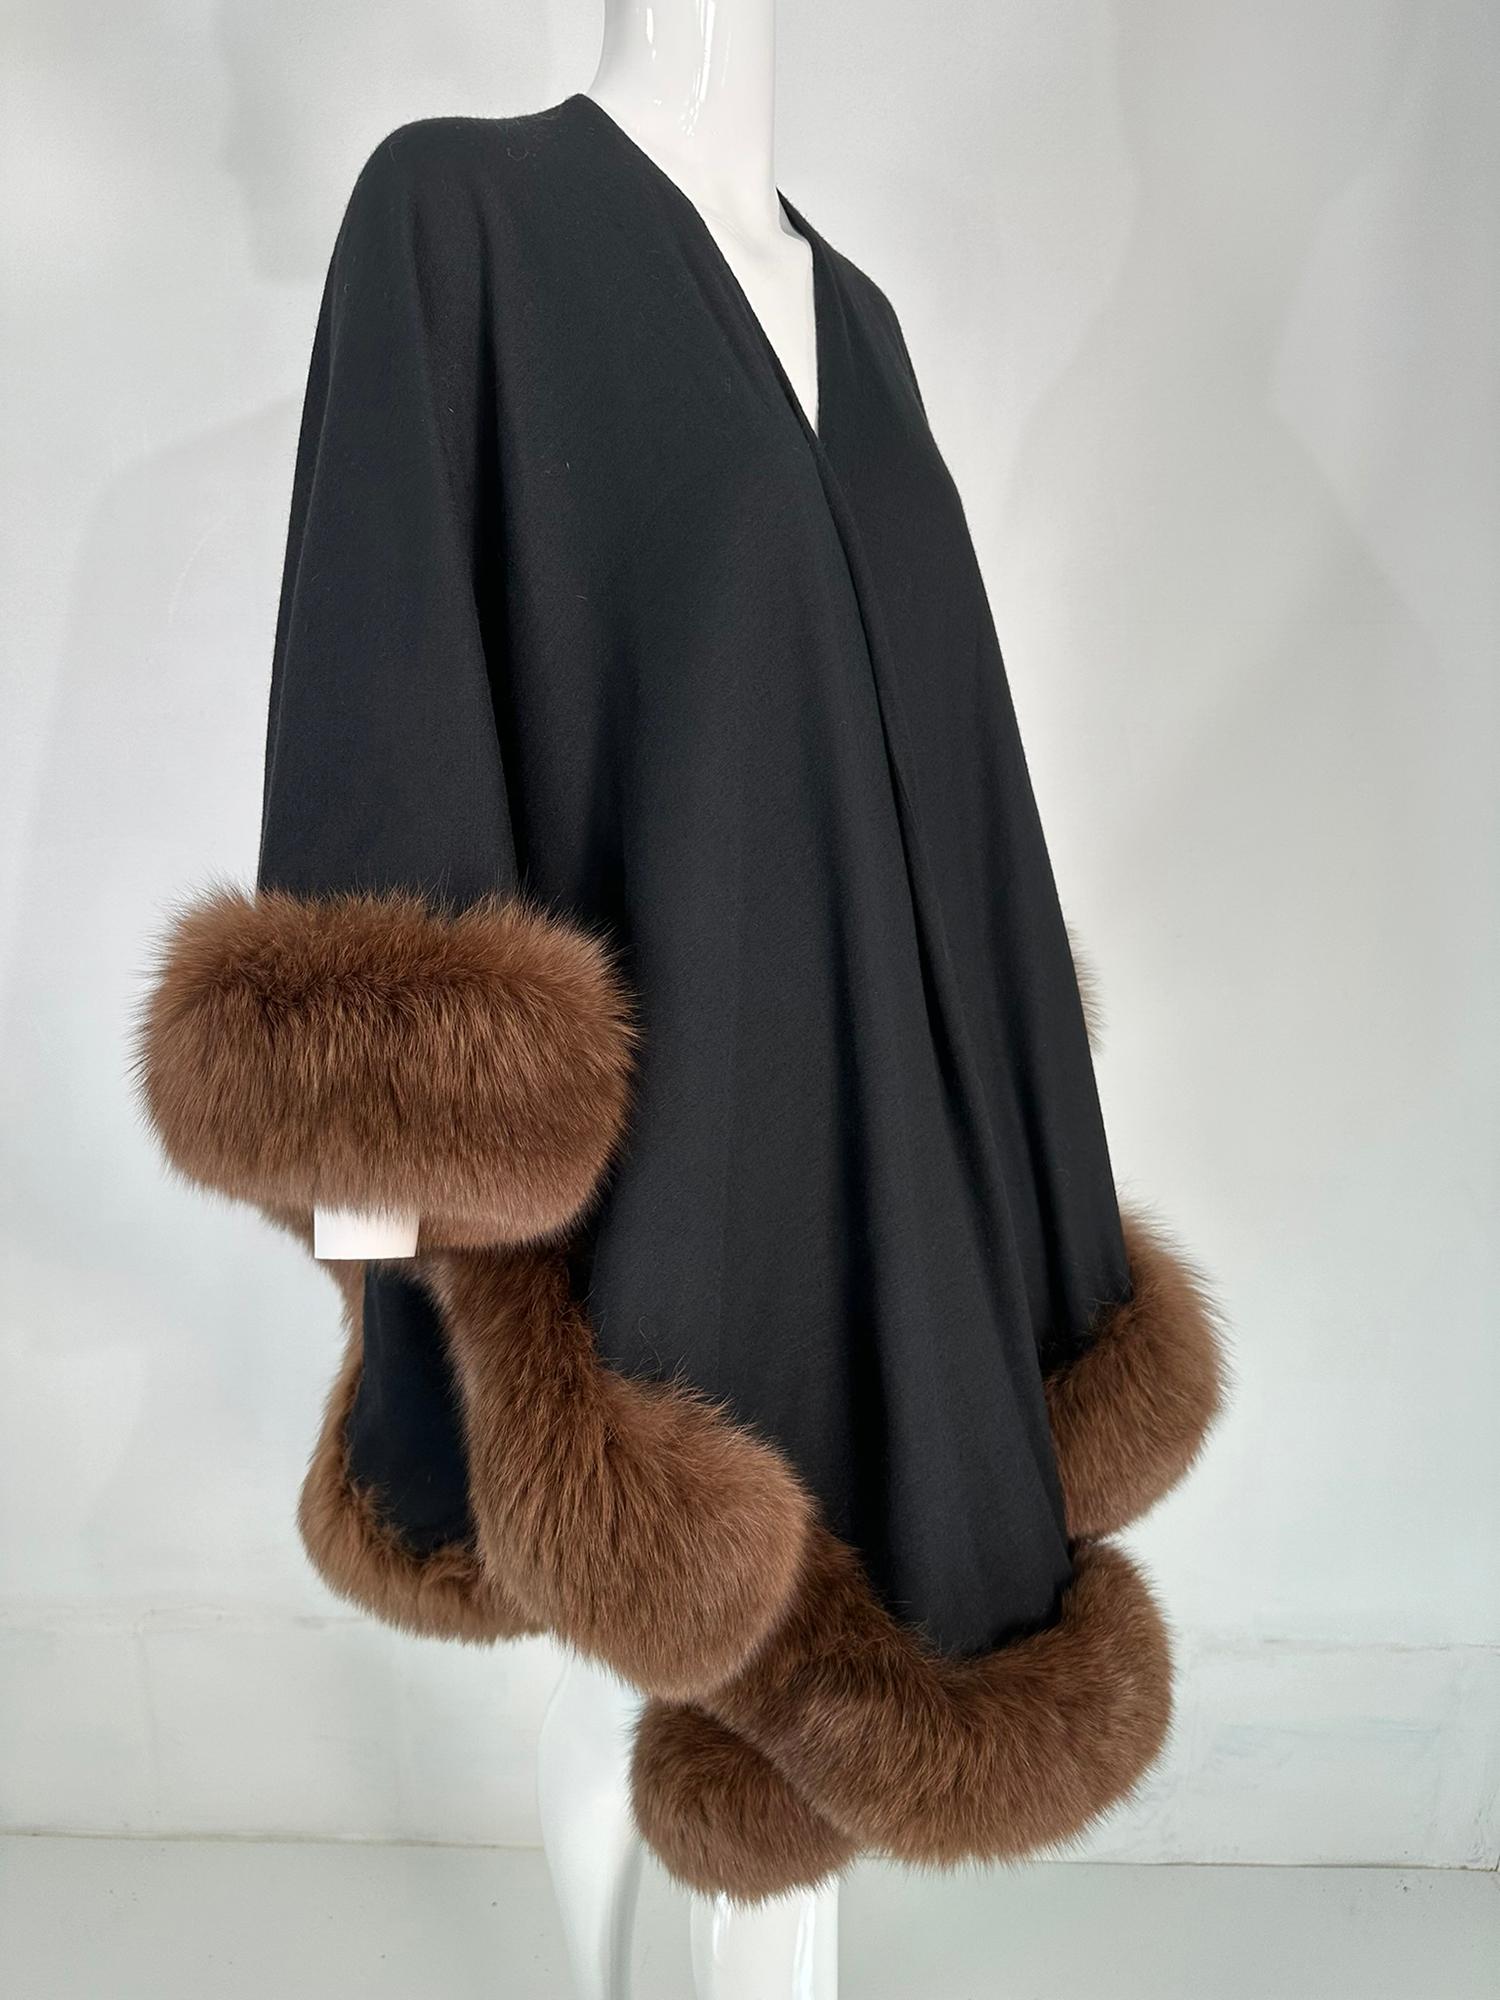 Adrienne Landau Sable Trimmed Black Wool knit Cape/Wrap From the 1990s For Sale 8